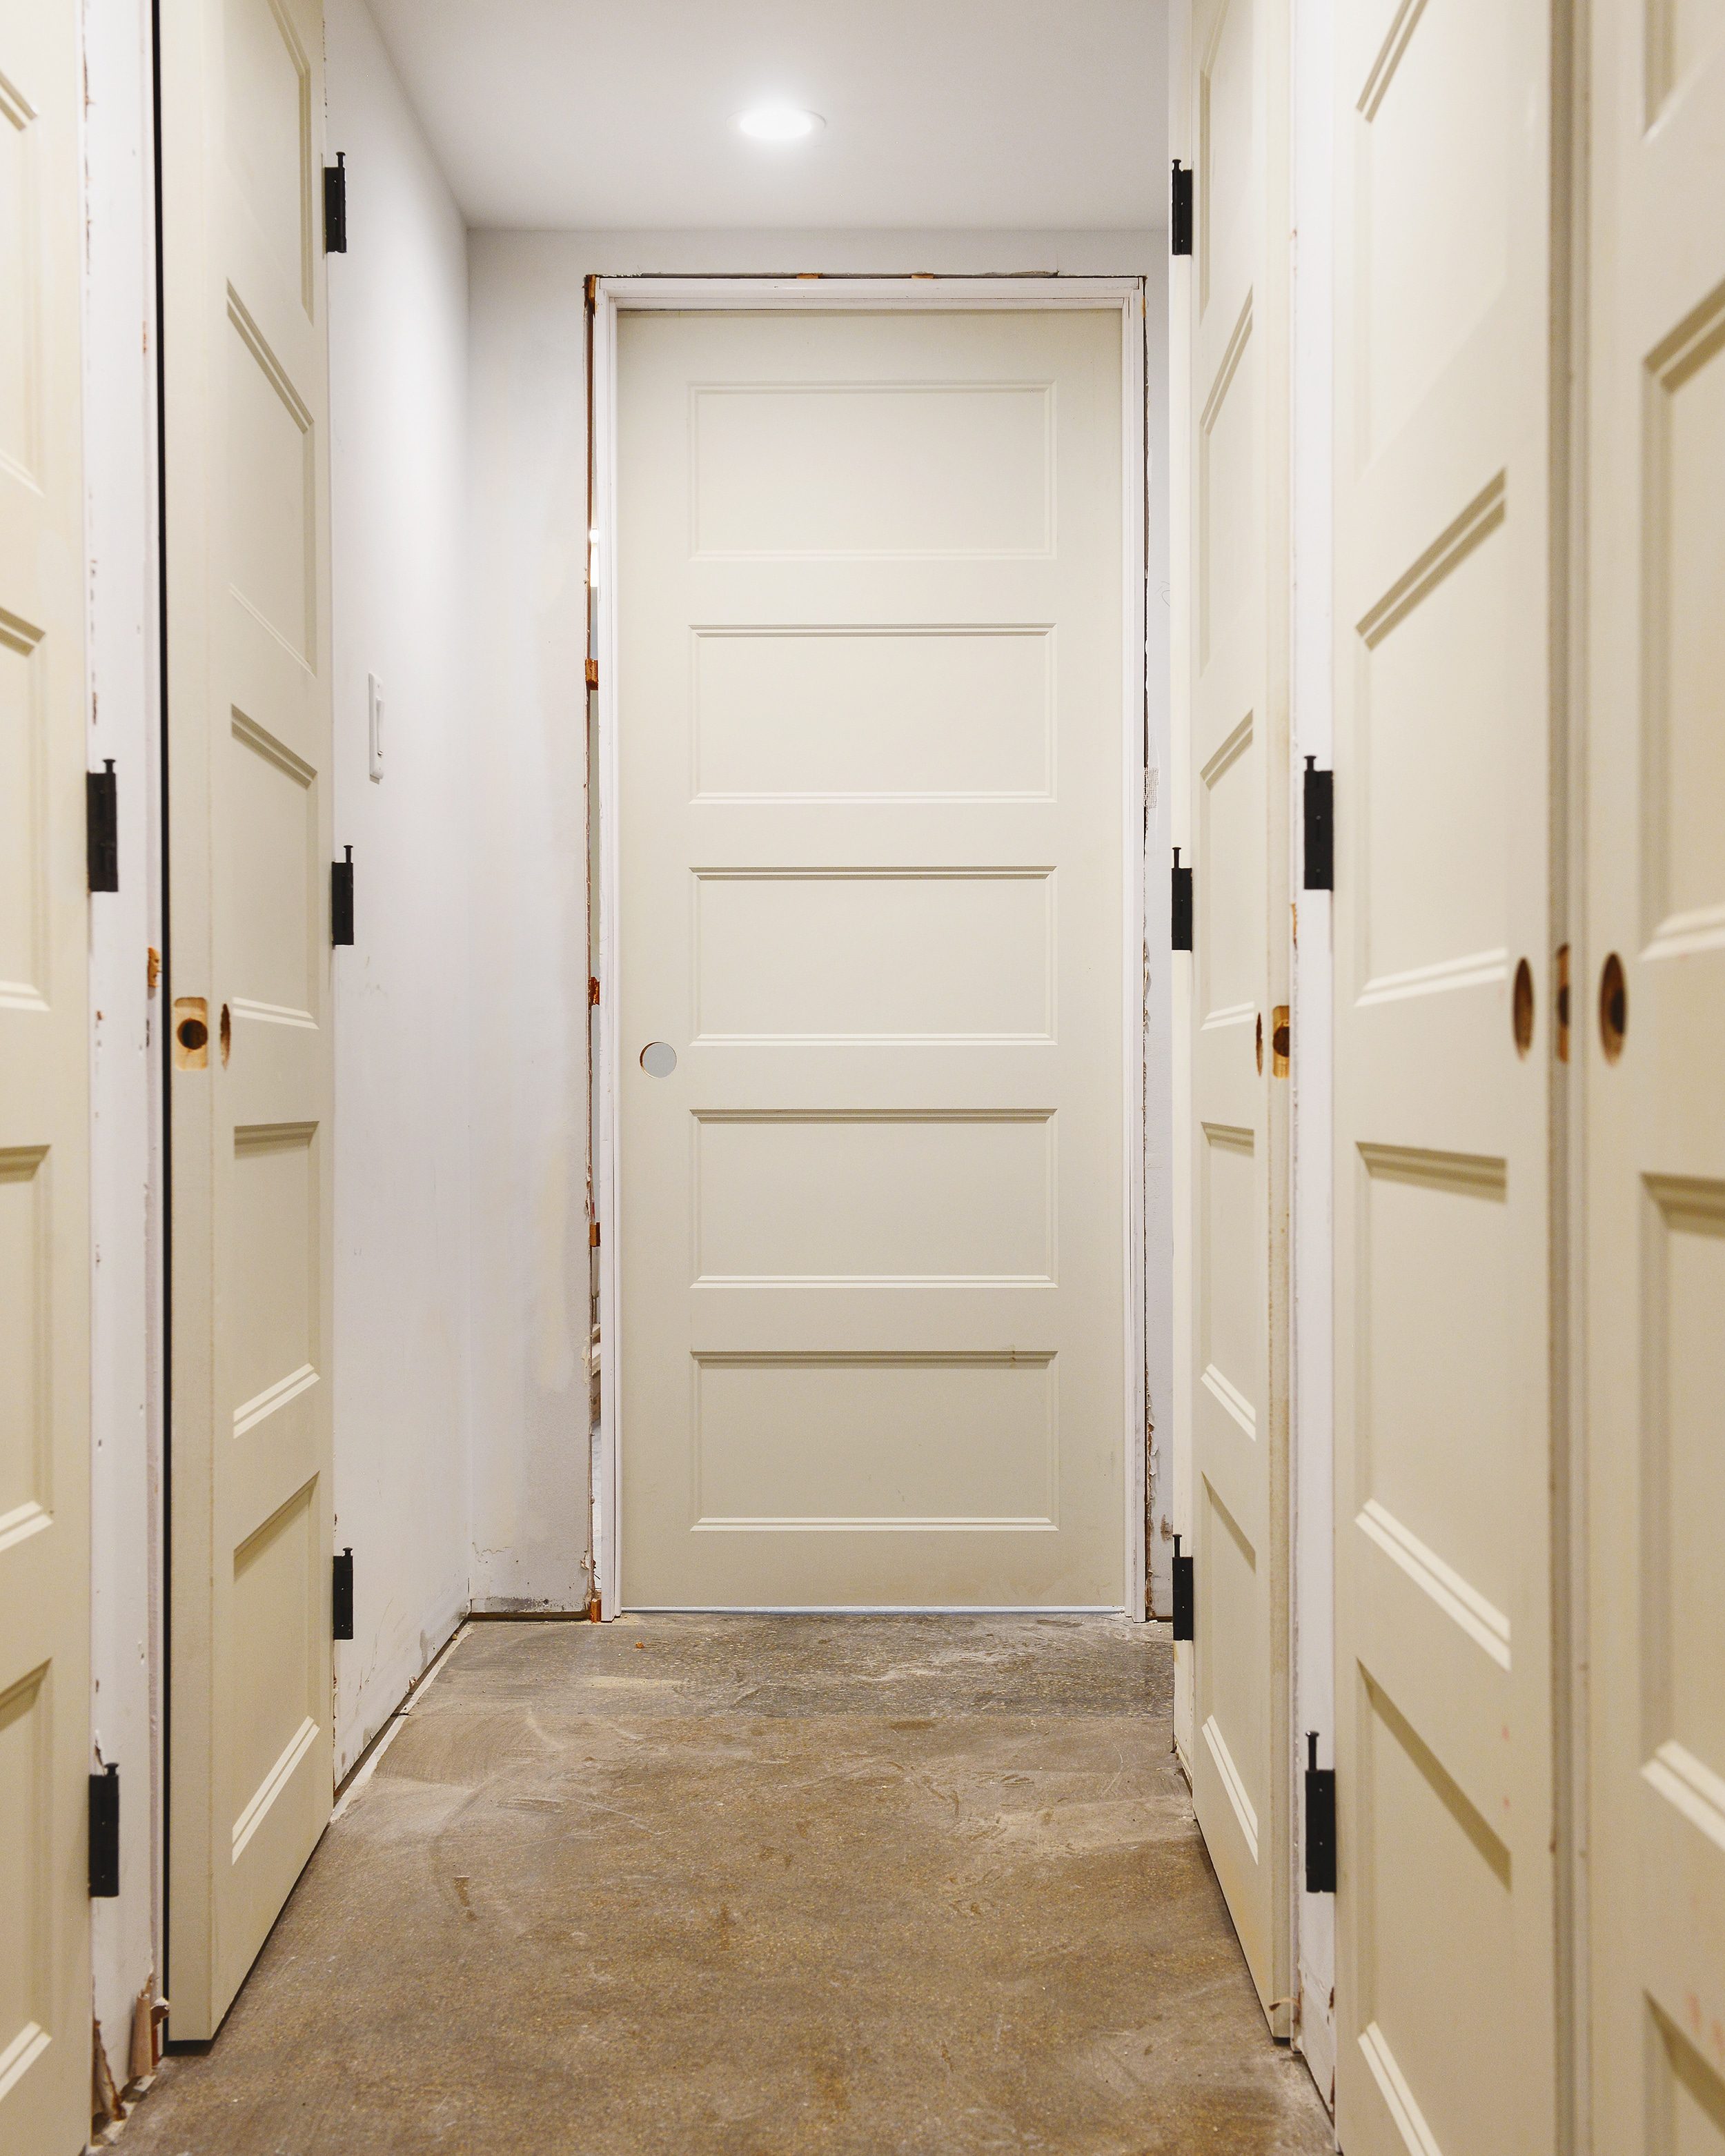 A long hallway full of newly installed primed doors // via yellow brick home